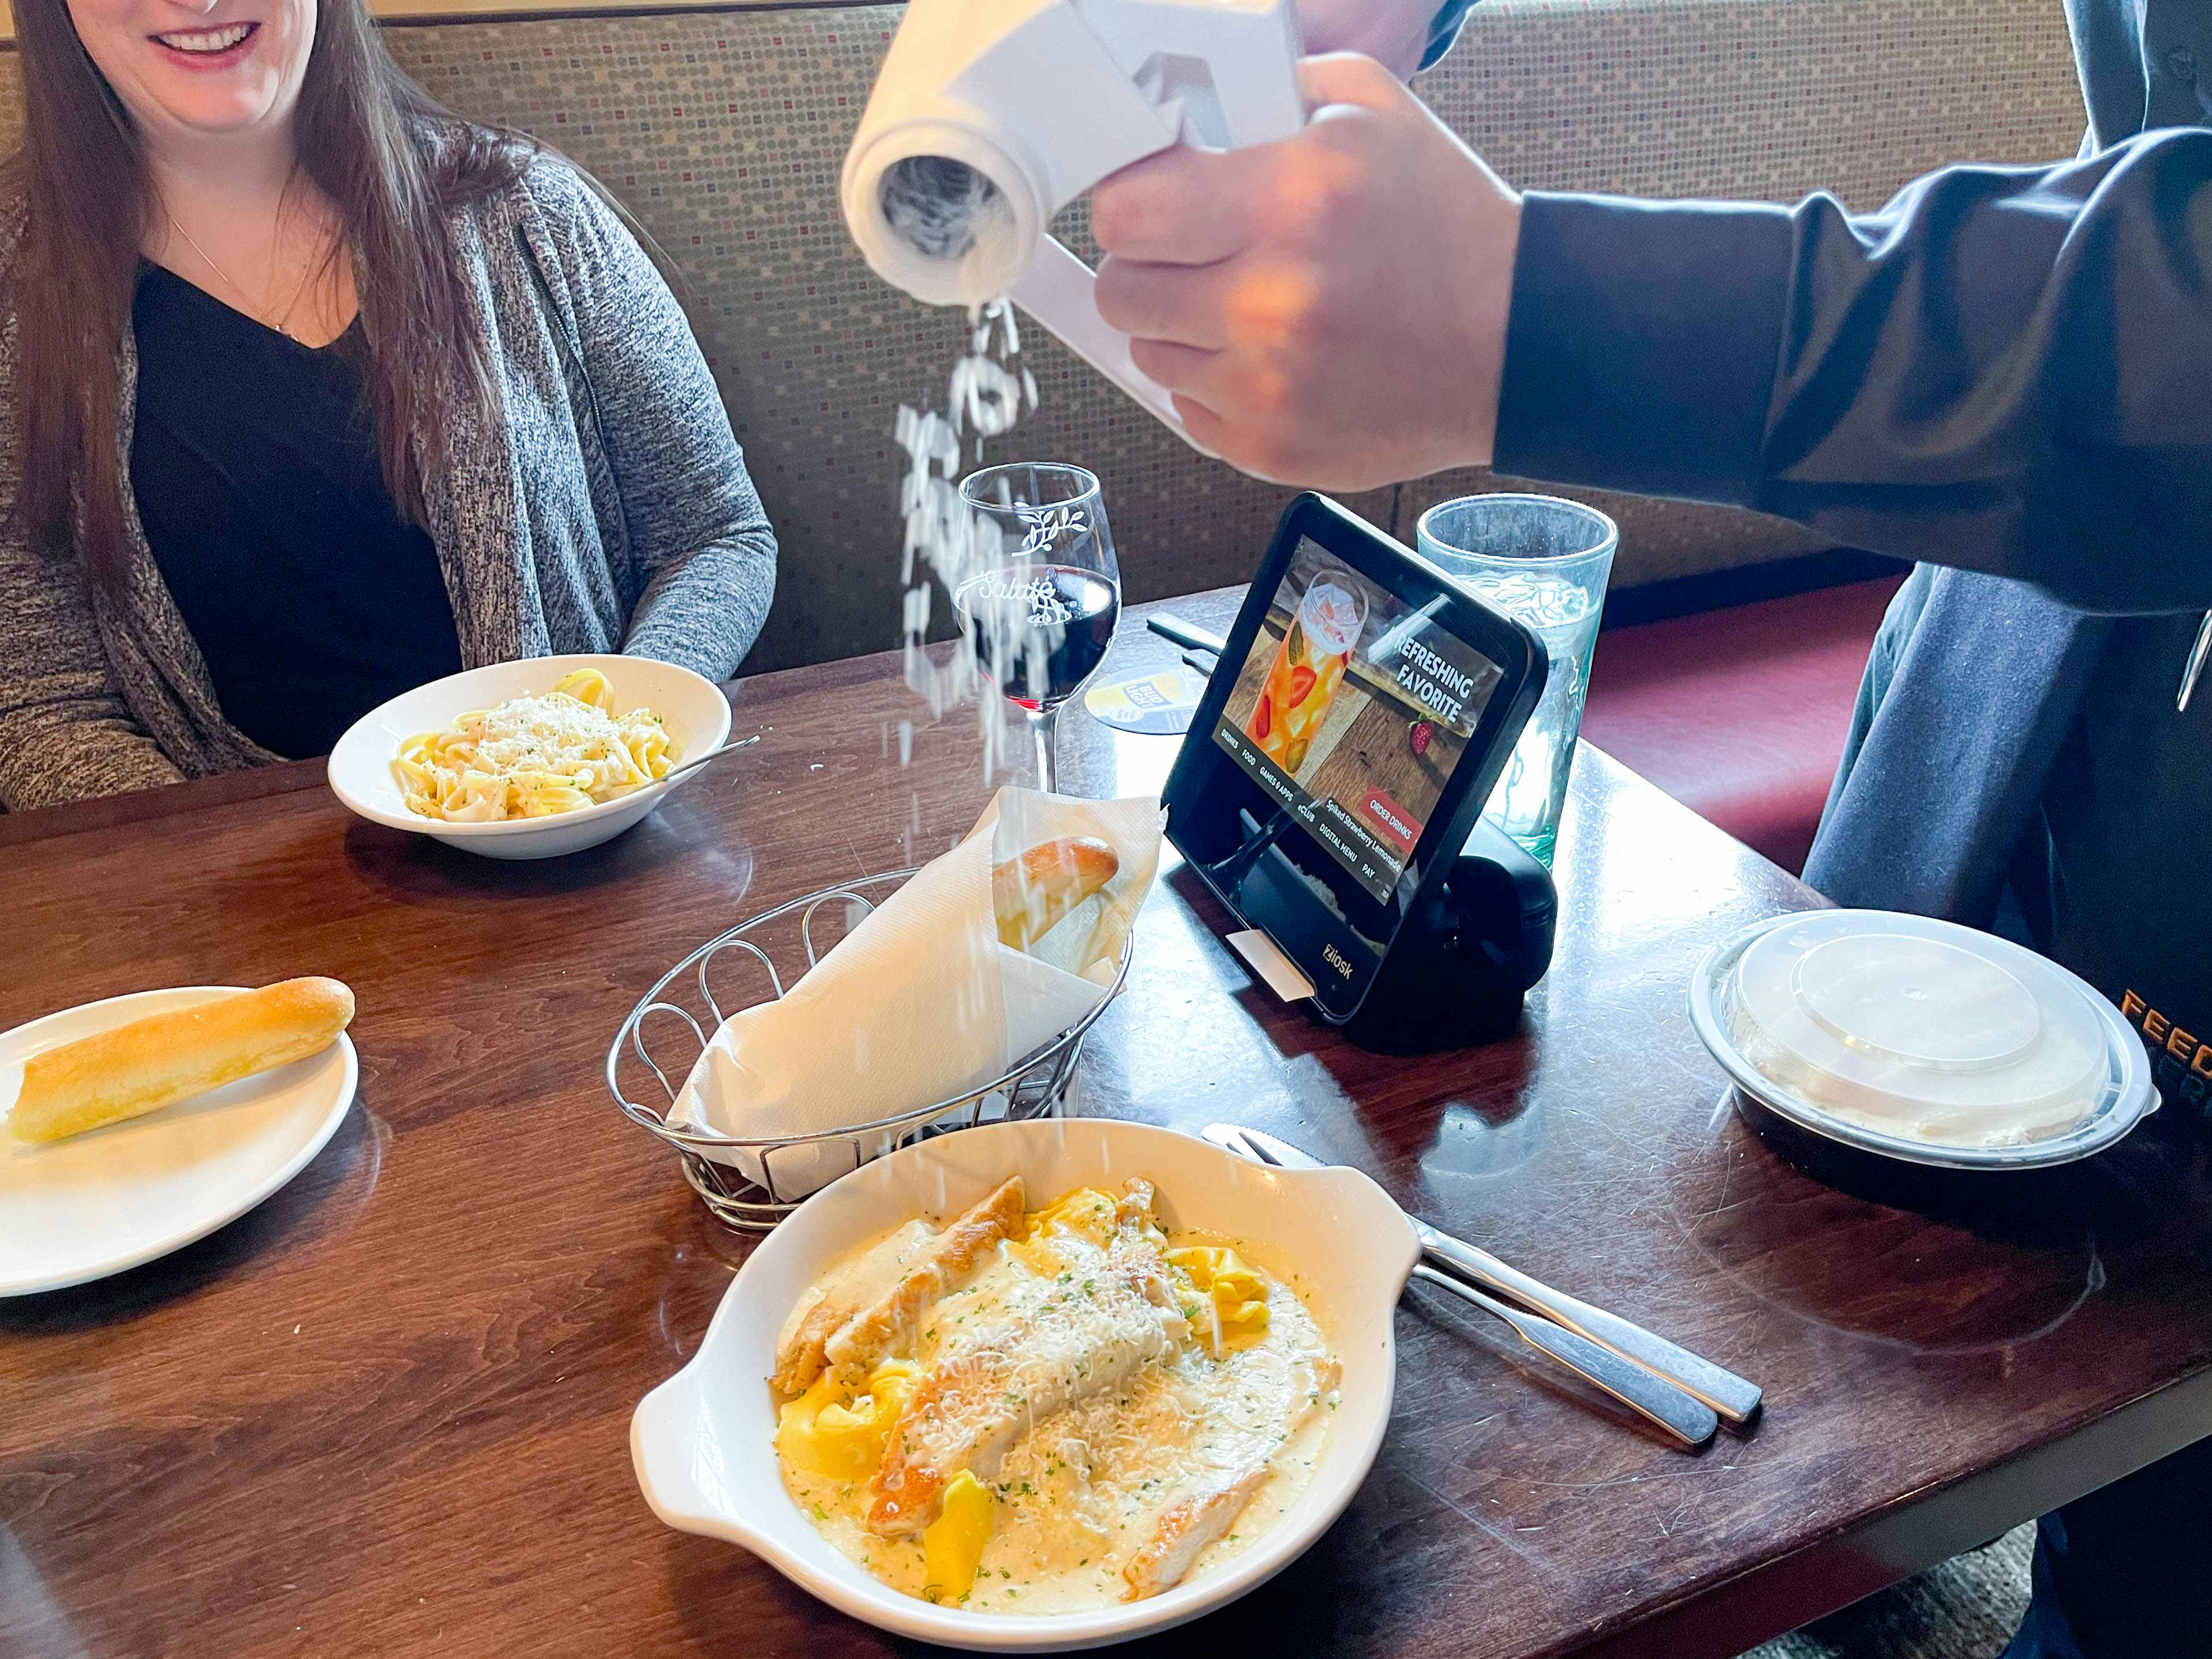 An Olive Garden server grating cheese onto a pasta dish sitting on the table in front of a customer.